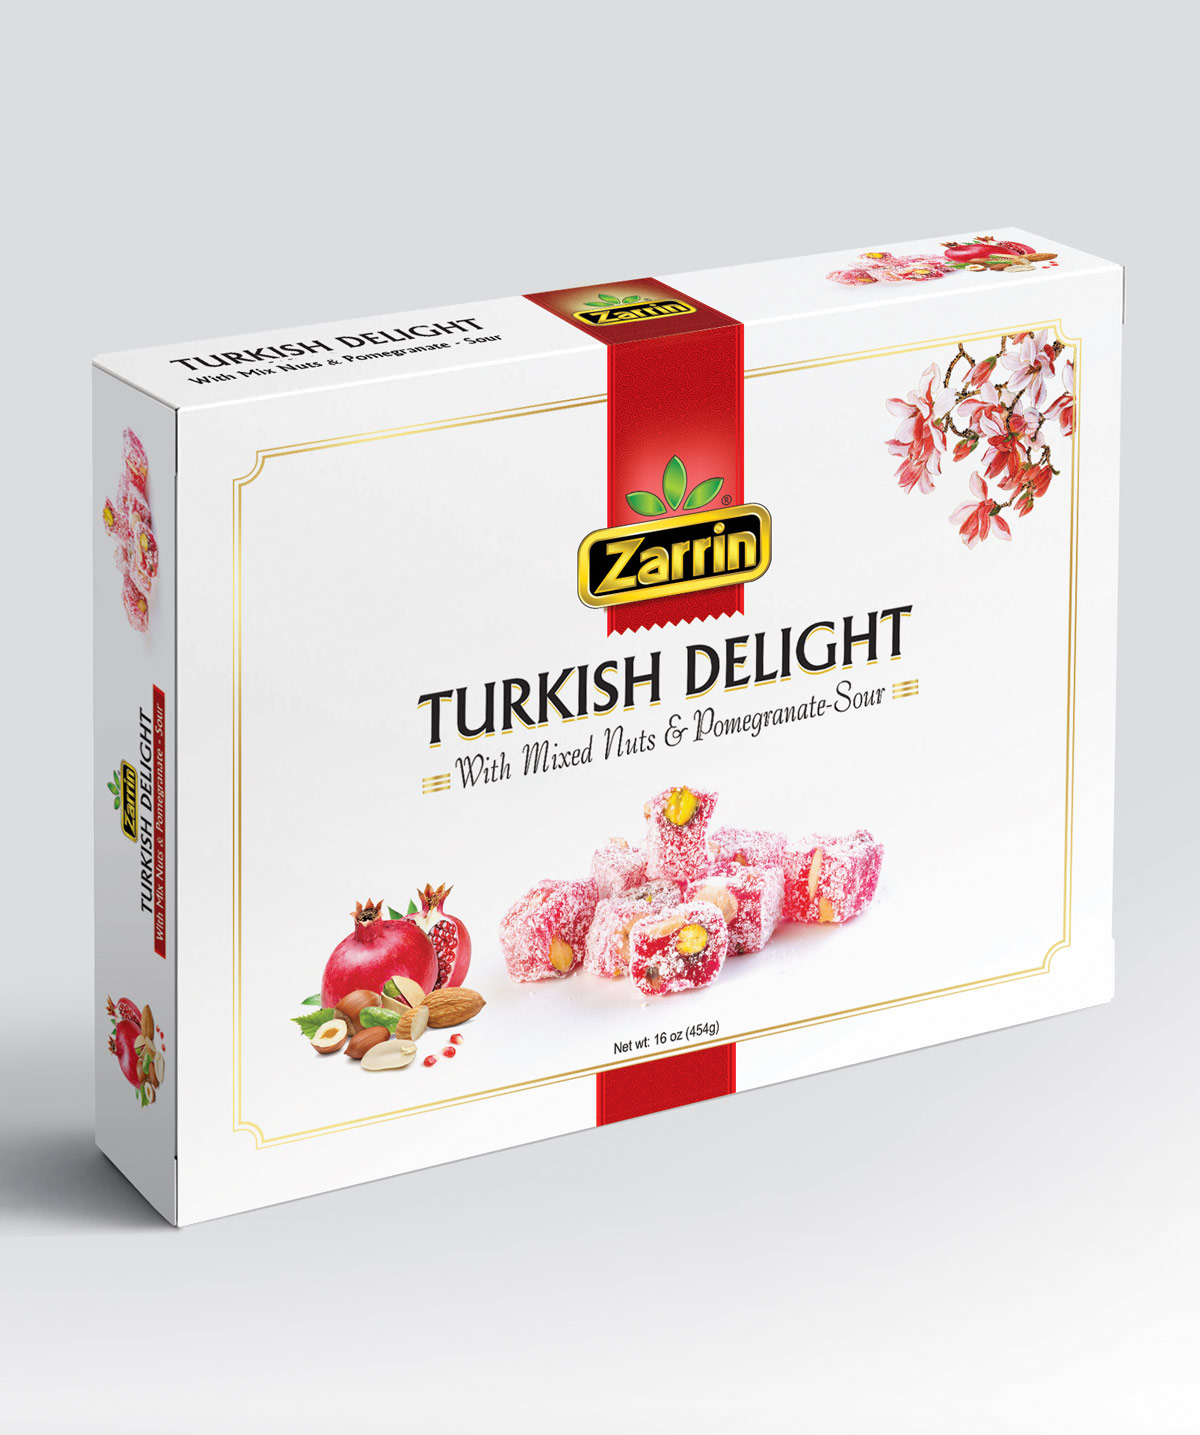 Turkish Delight With Mixed Nuts & Pomegranate sour